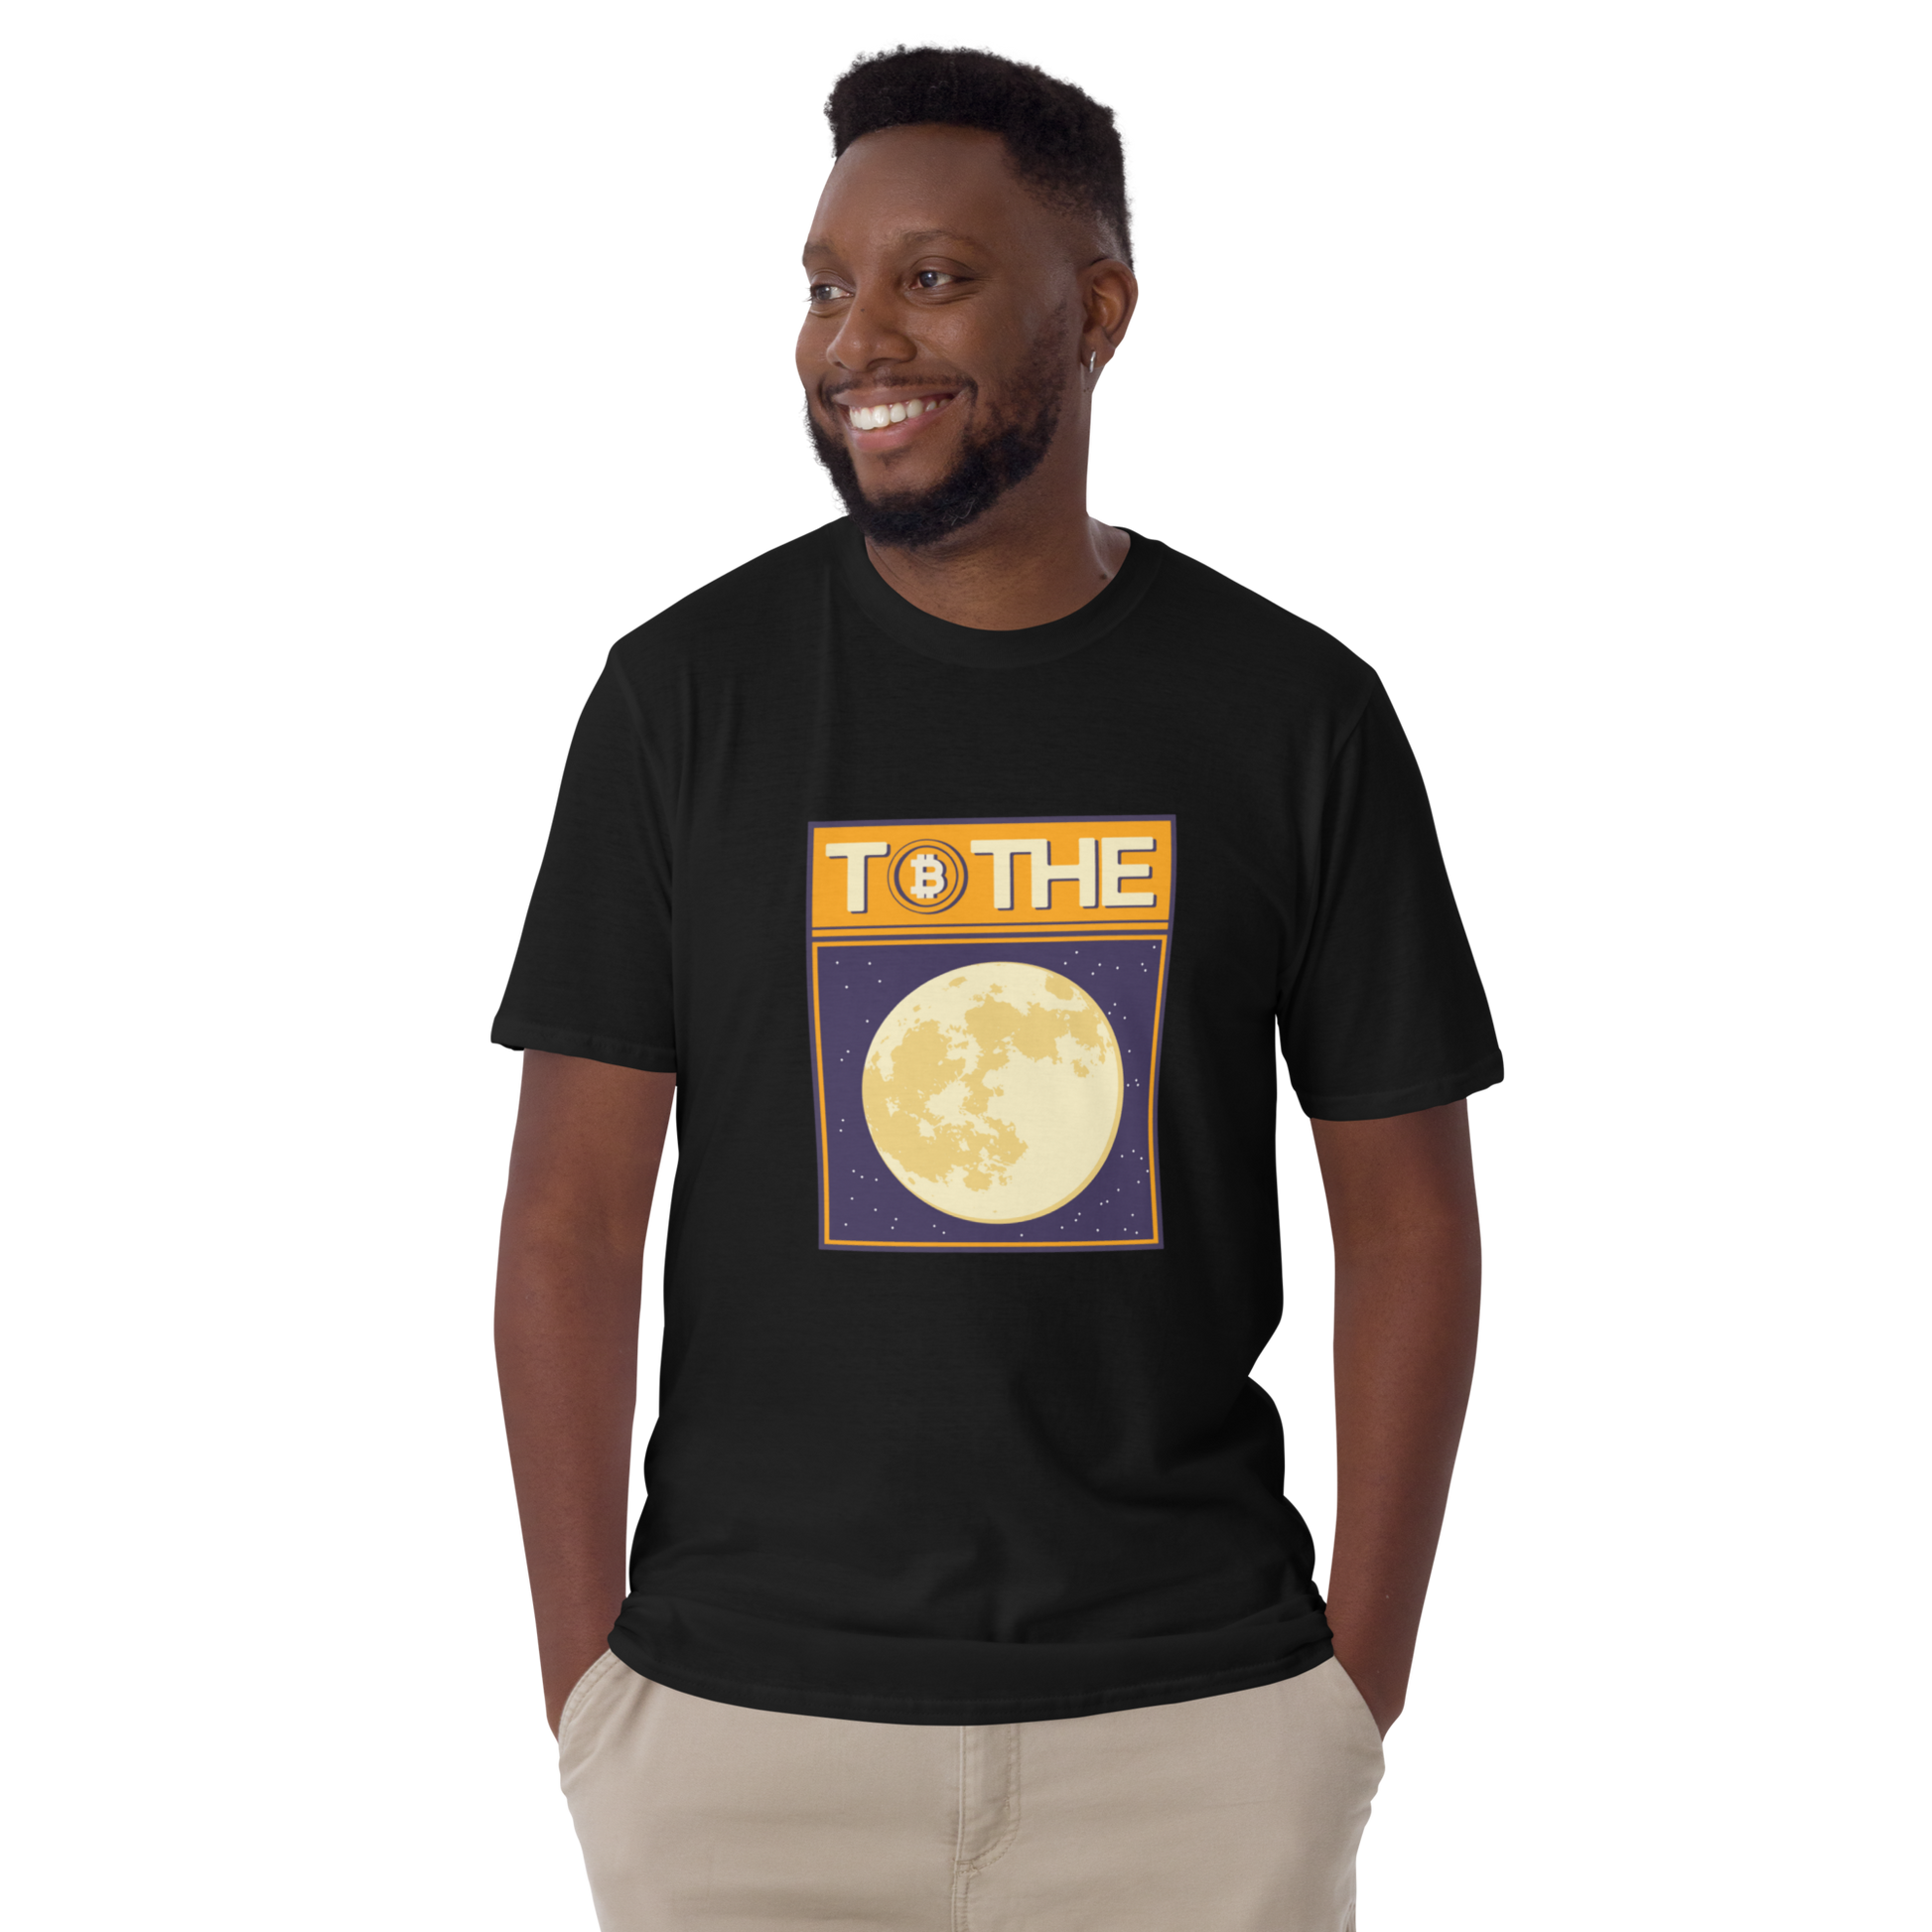 Smiling man wearing a Black Bitcoin T-Shirt featuring a funny To The Moon graphic on the chest - Cool Graphic Bitcoin T-Shirts - Boozy Fox